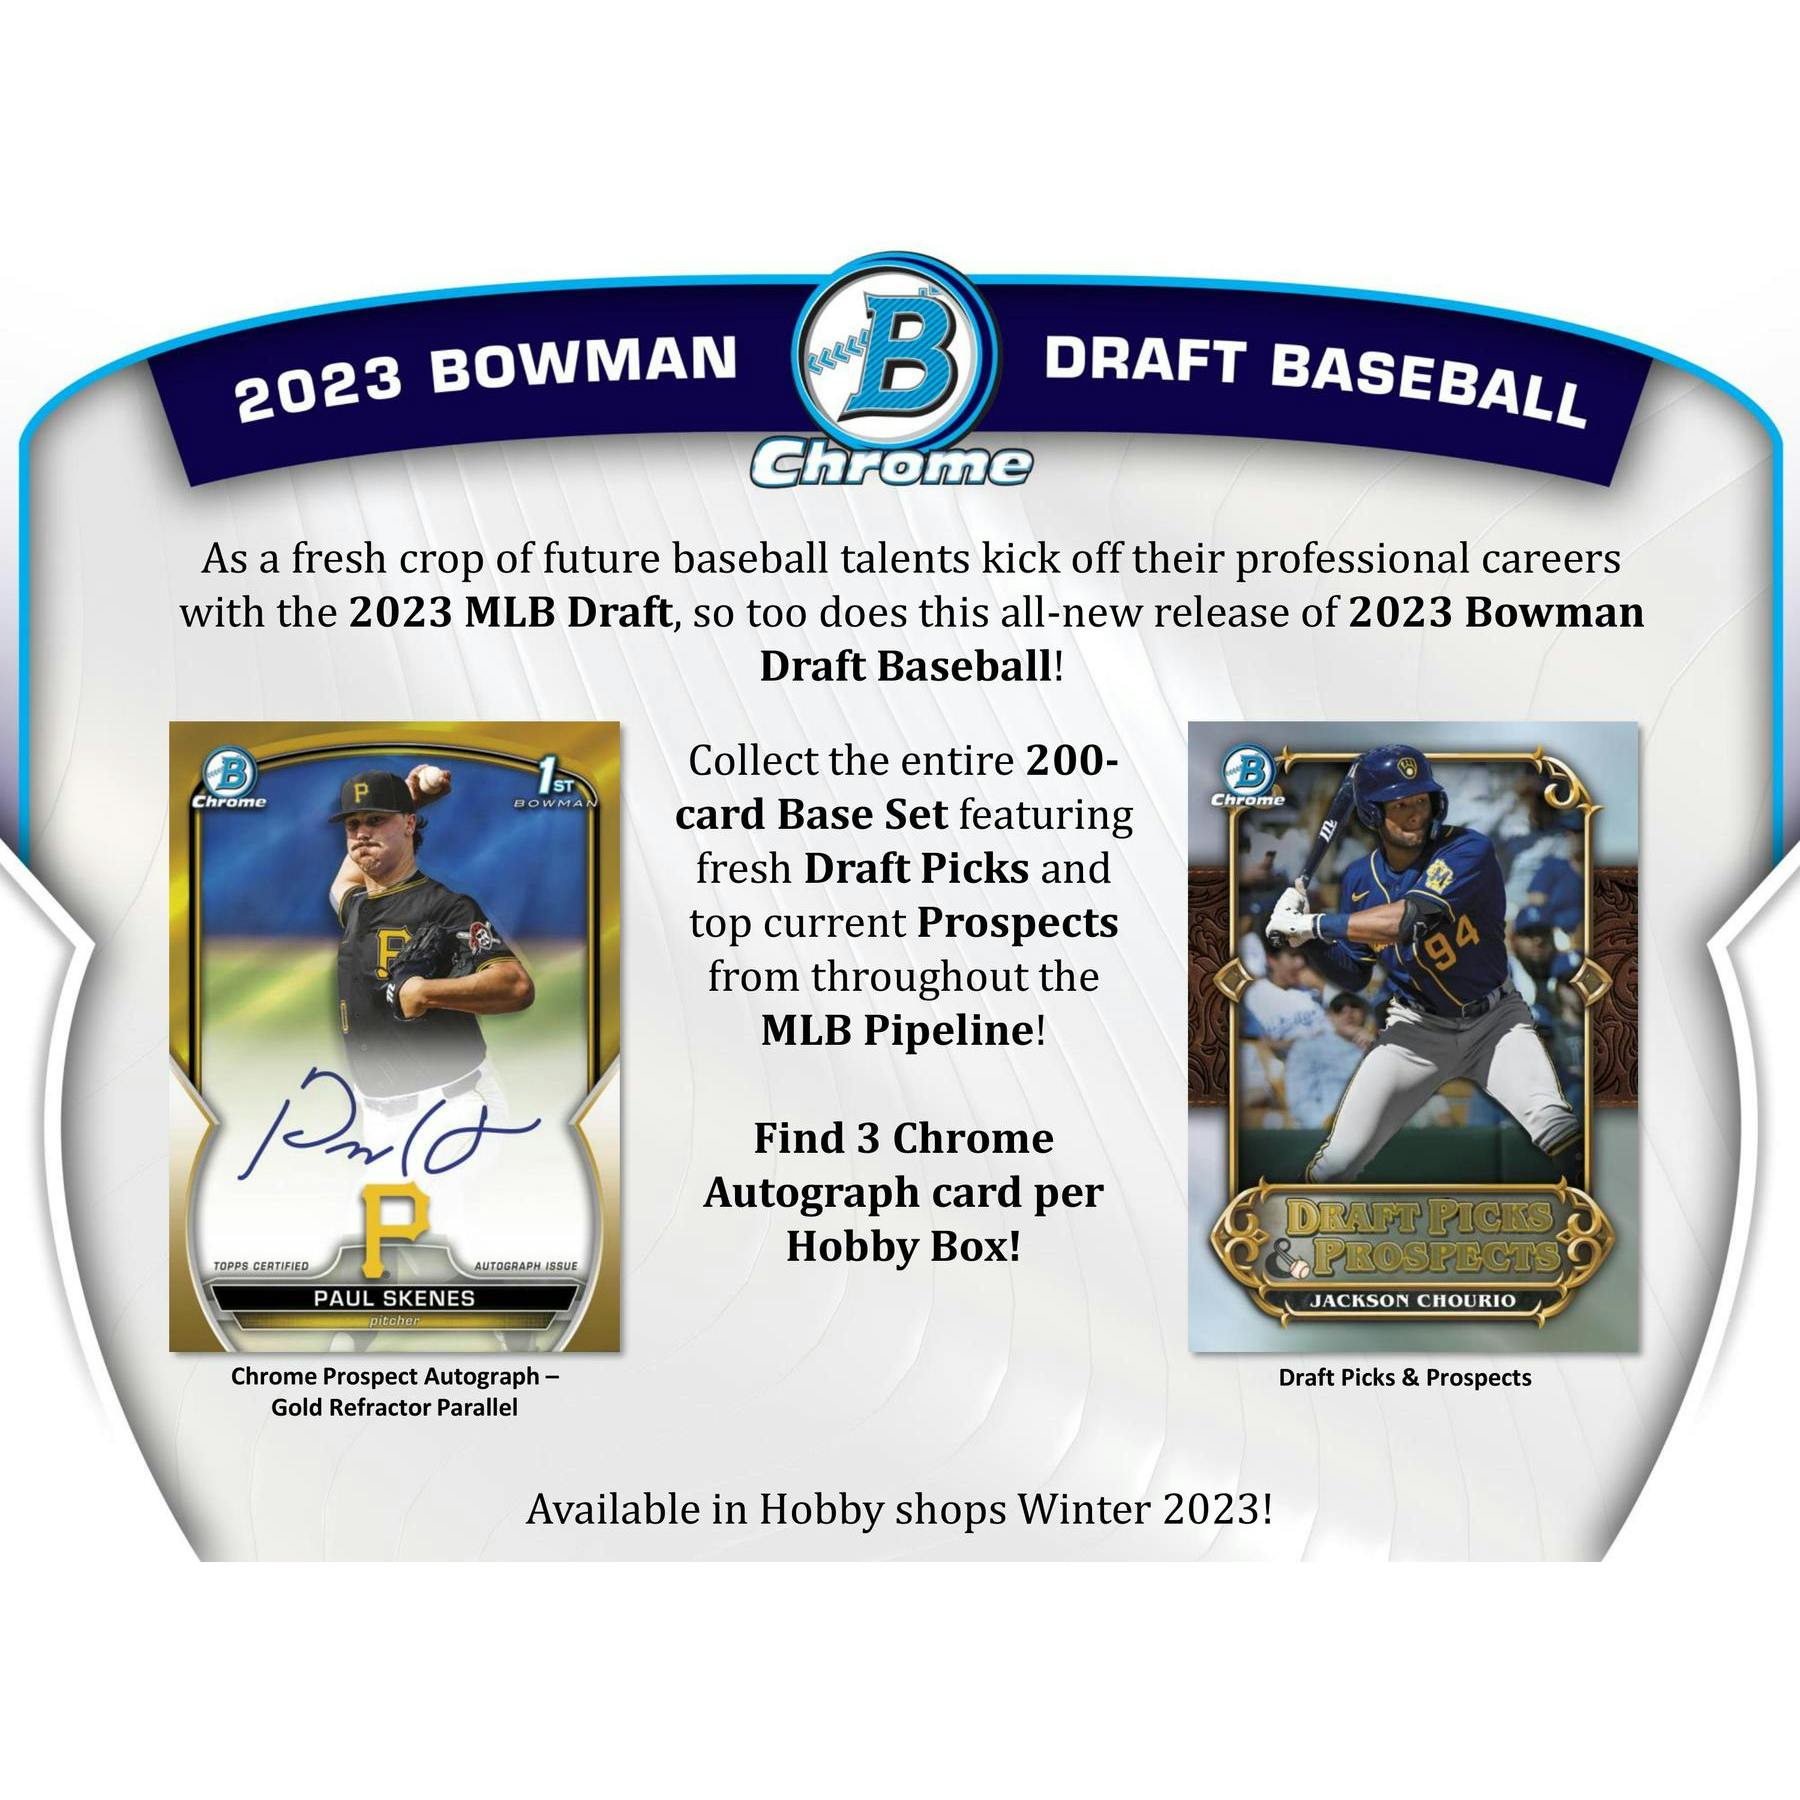 2023 Bowman Draft Top 25 Hitters, MLB Top Prospects to Chase